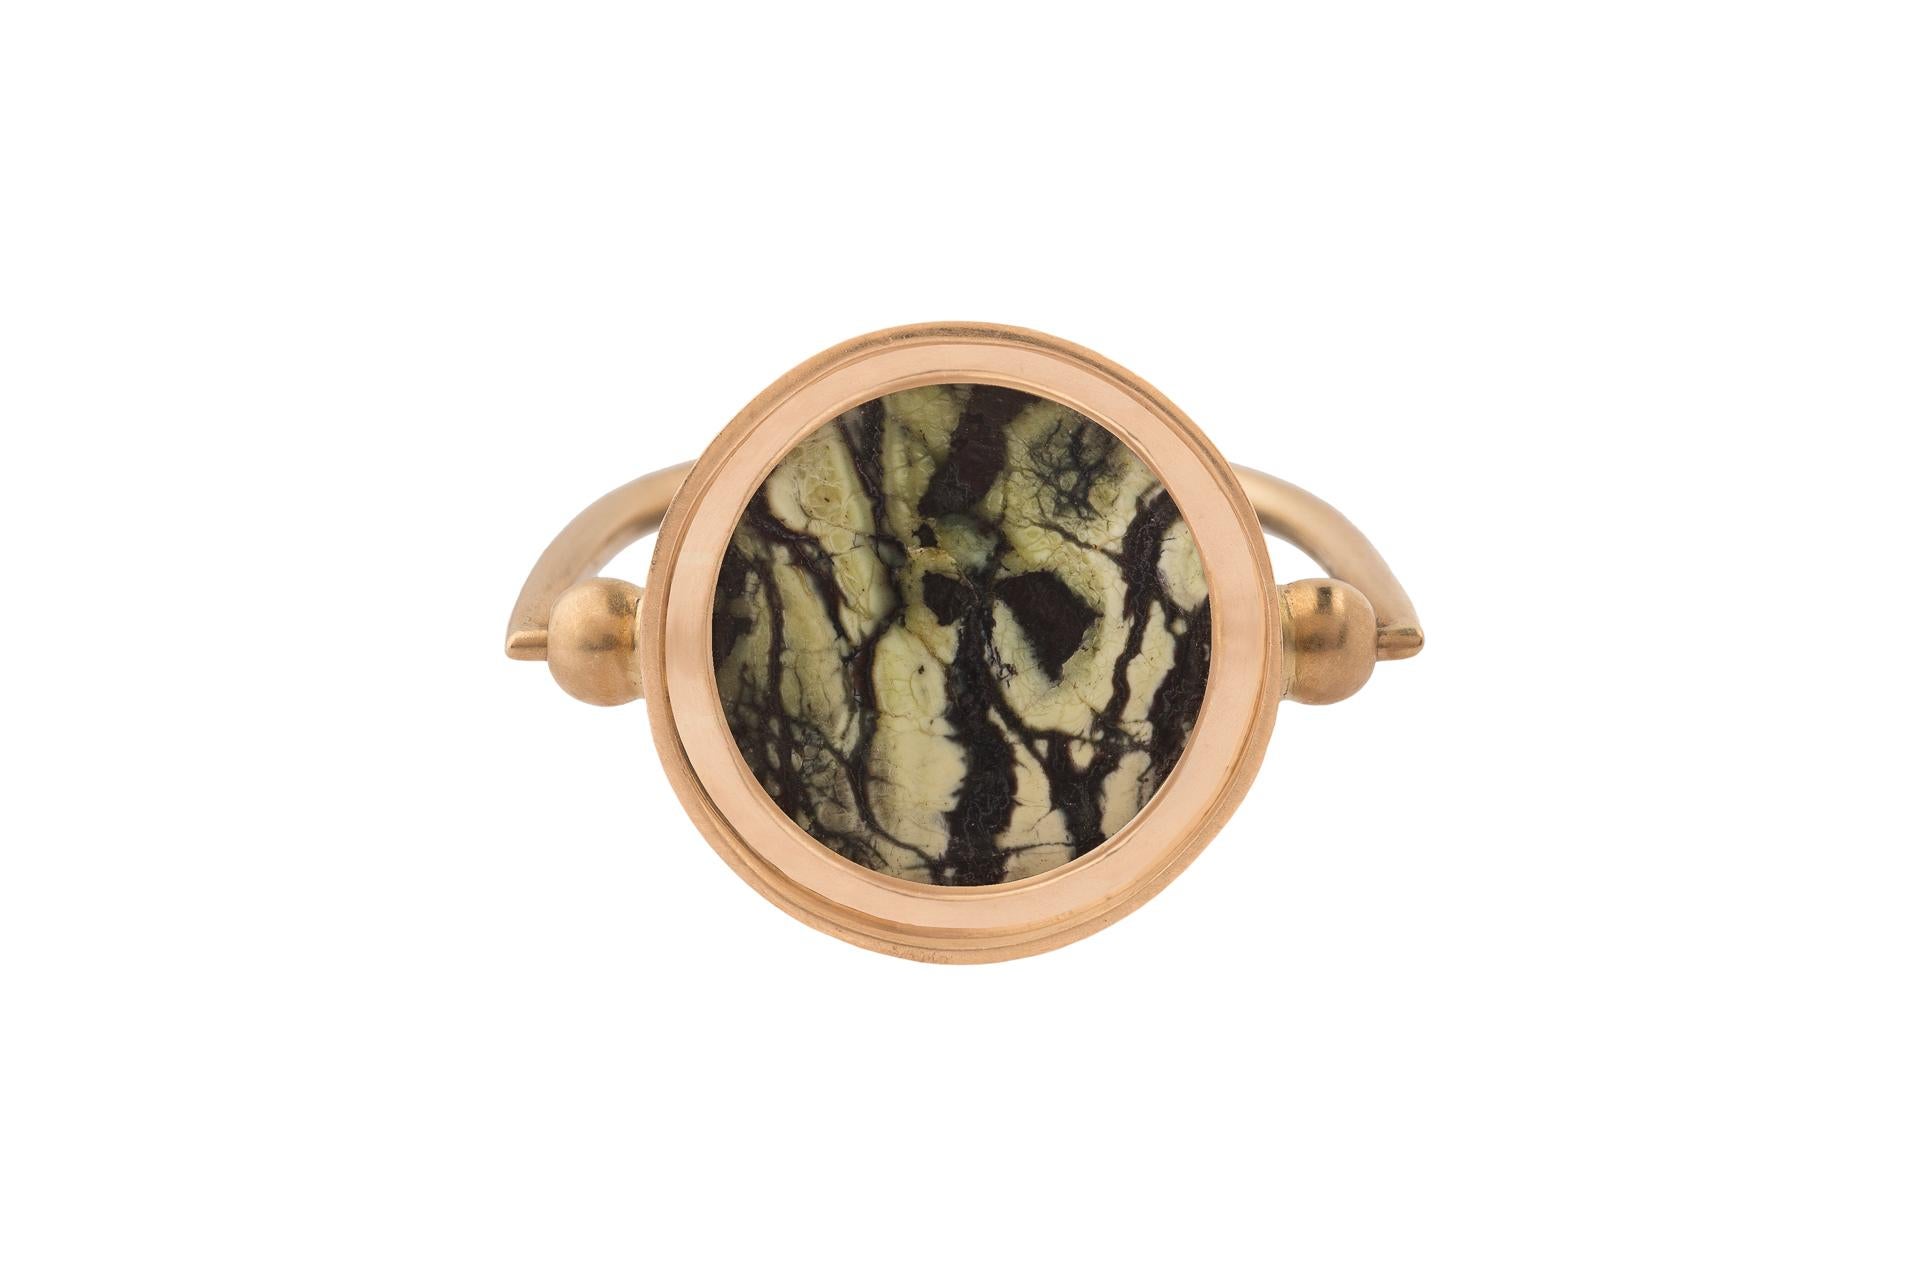 TREESNAKE by OUROBOROS 
Verde impruneta fgabbro ranocchia and cologolon set in 18kt gold ring.

 If this item is out of stock. Everything is made to order and can take 4-6 weeks.

OUROBOROS is an artisanal brand, based out of Jaipur and designed by